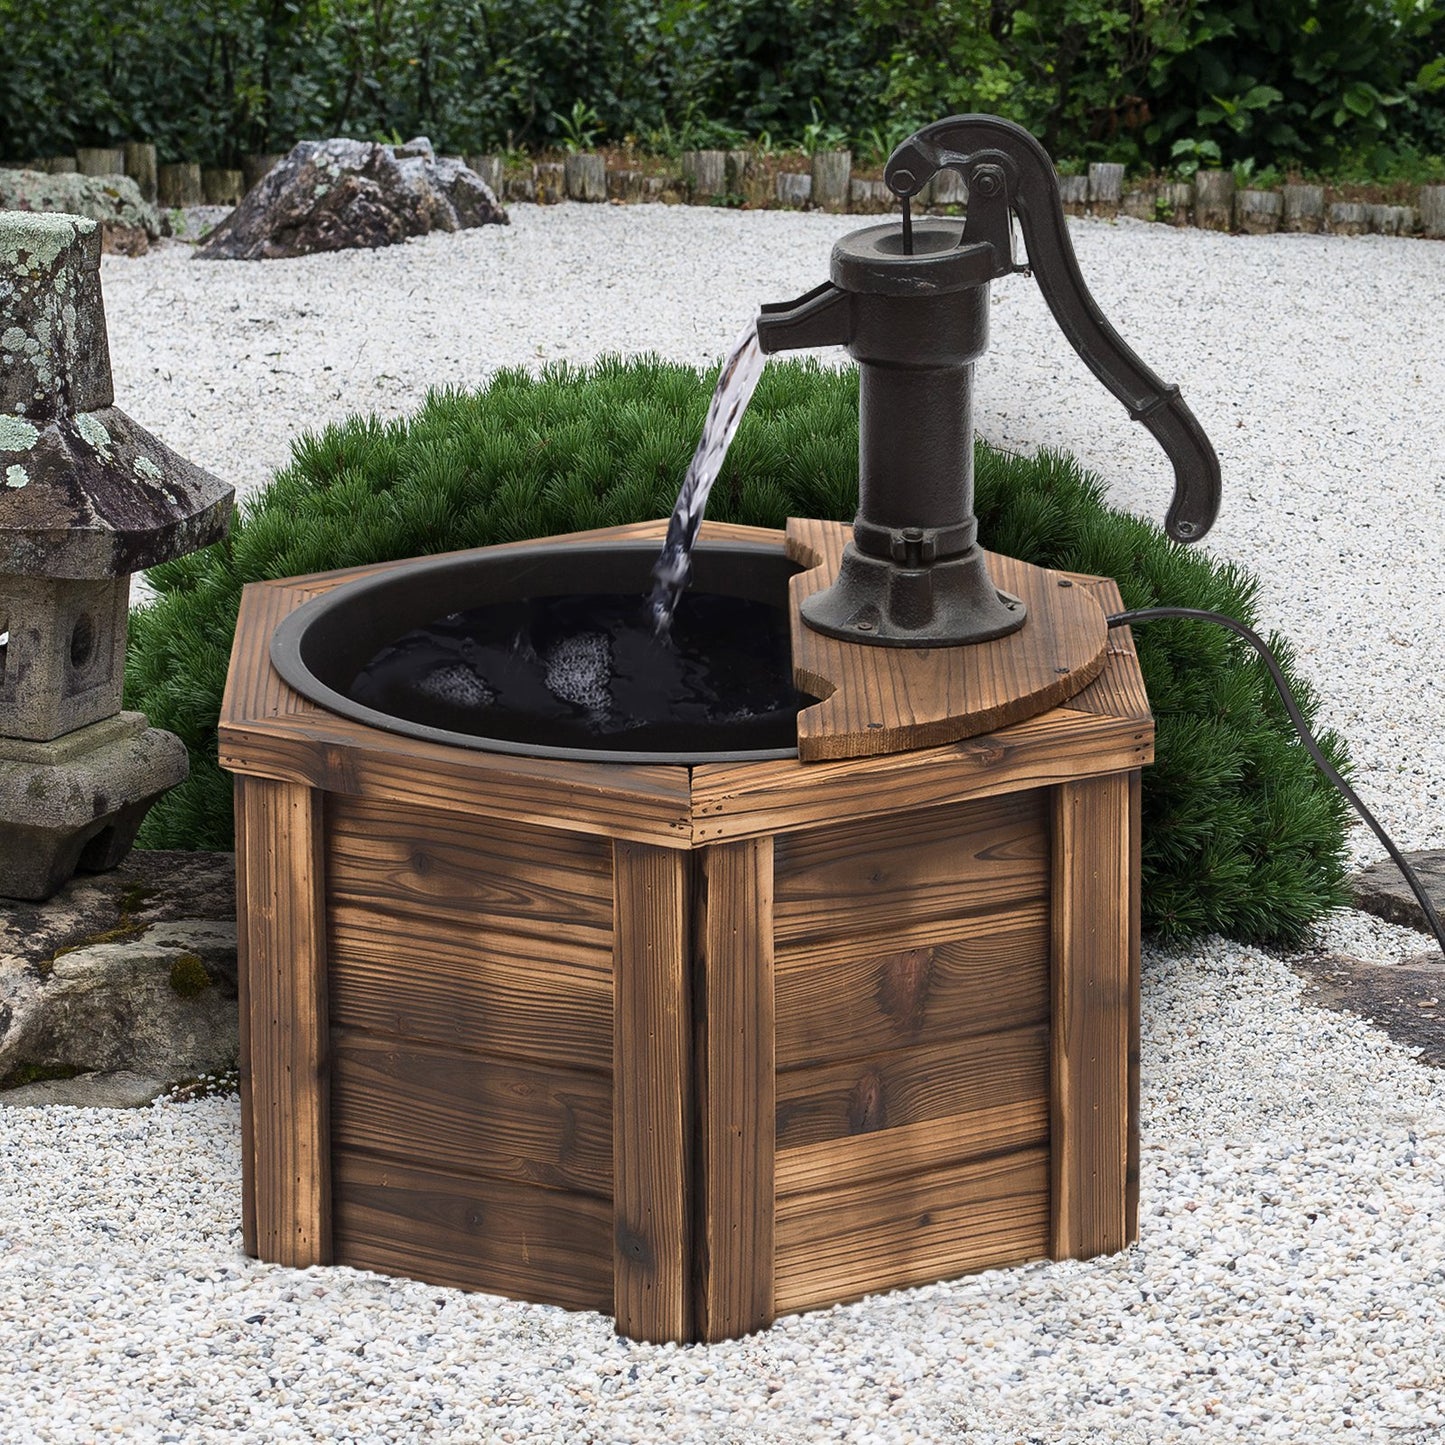 Outsunny Wooden Electric Water Fountain Garden Ornament w/ Hand Pump Plastic Well Vintage